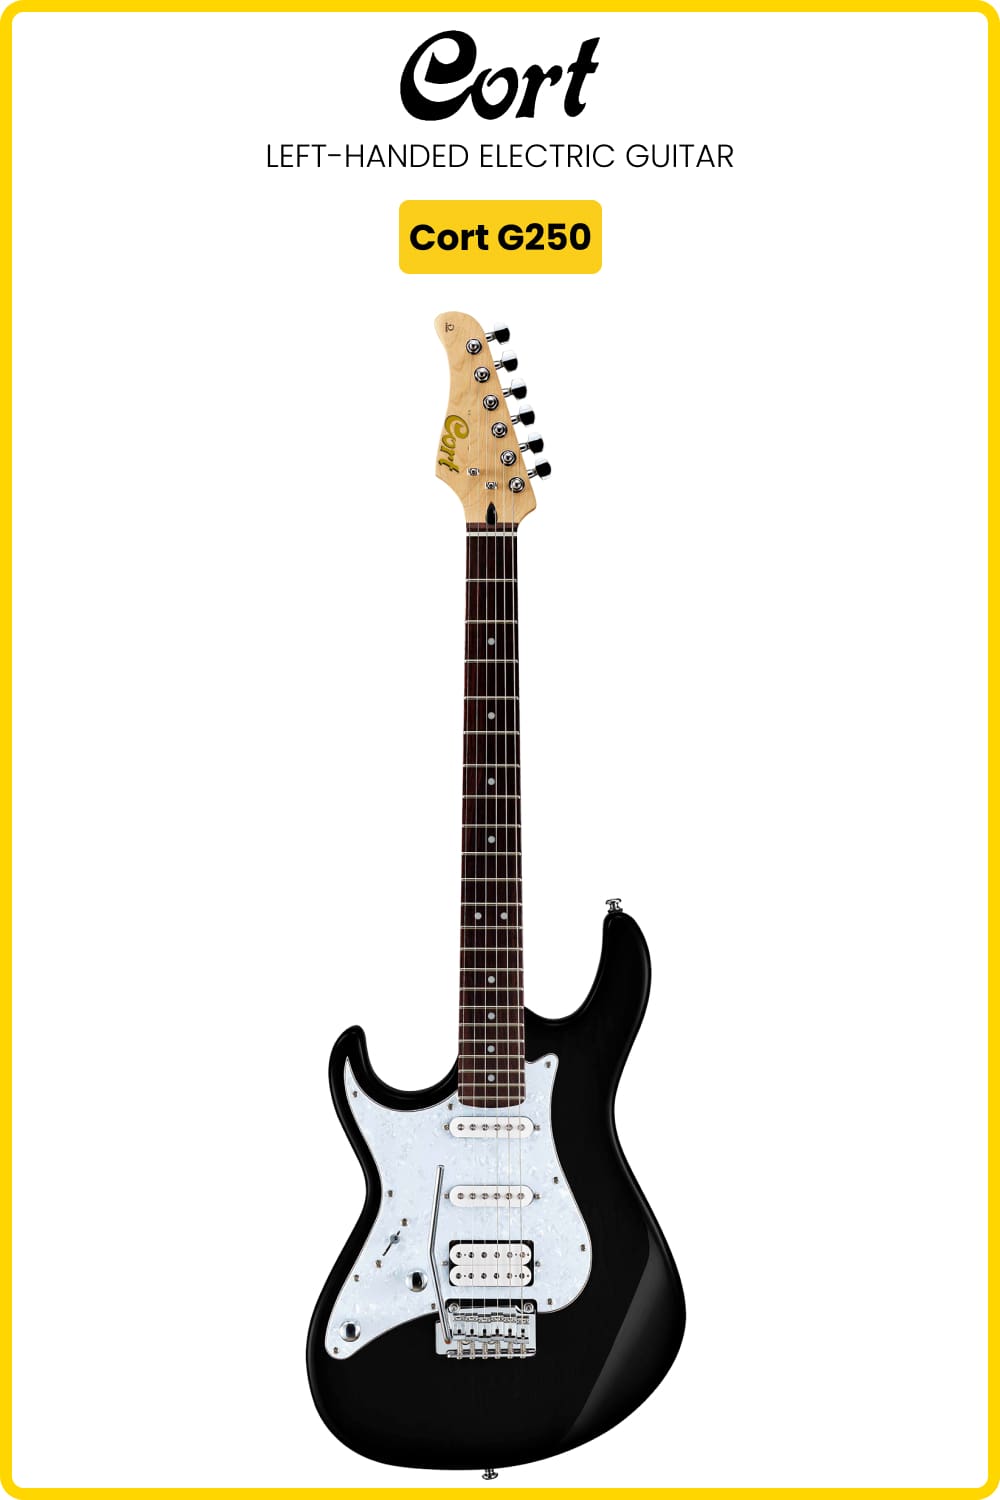 Left-Handed Electric Guitar Cort G250